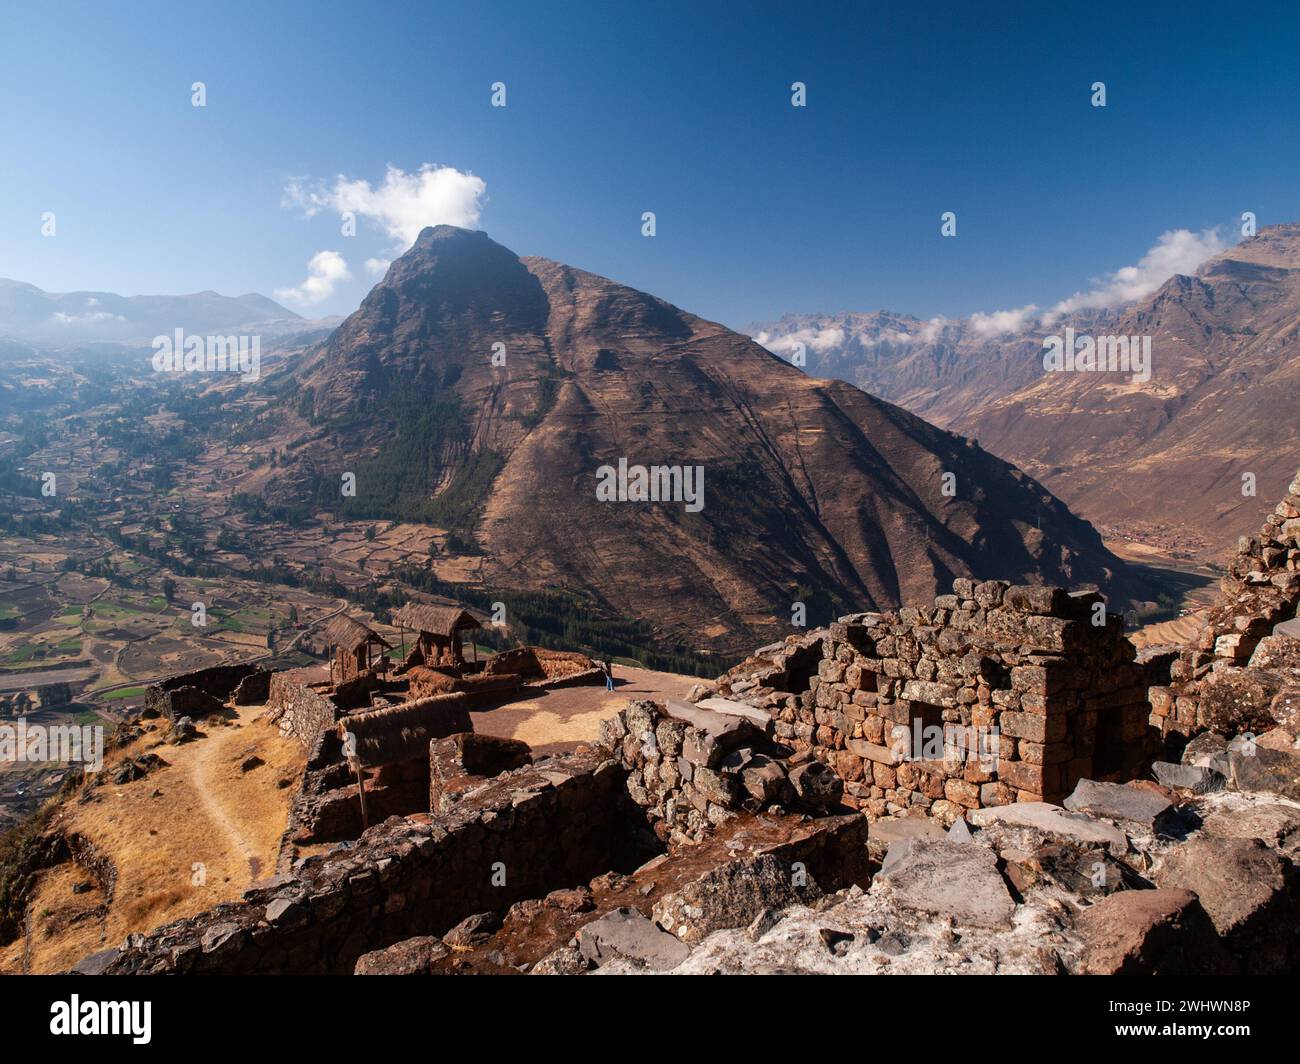 Landscape photography of Andean mountains from the archaeological remains in the Sacred Valley of the Incas in Pisac, Calca, Peru. Stock Photo